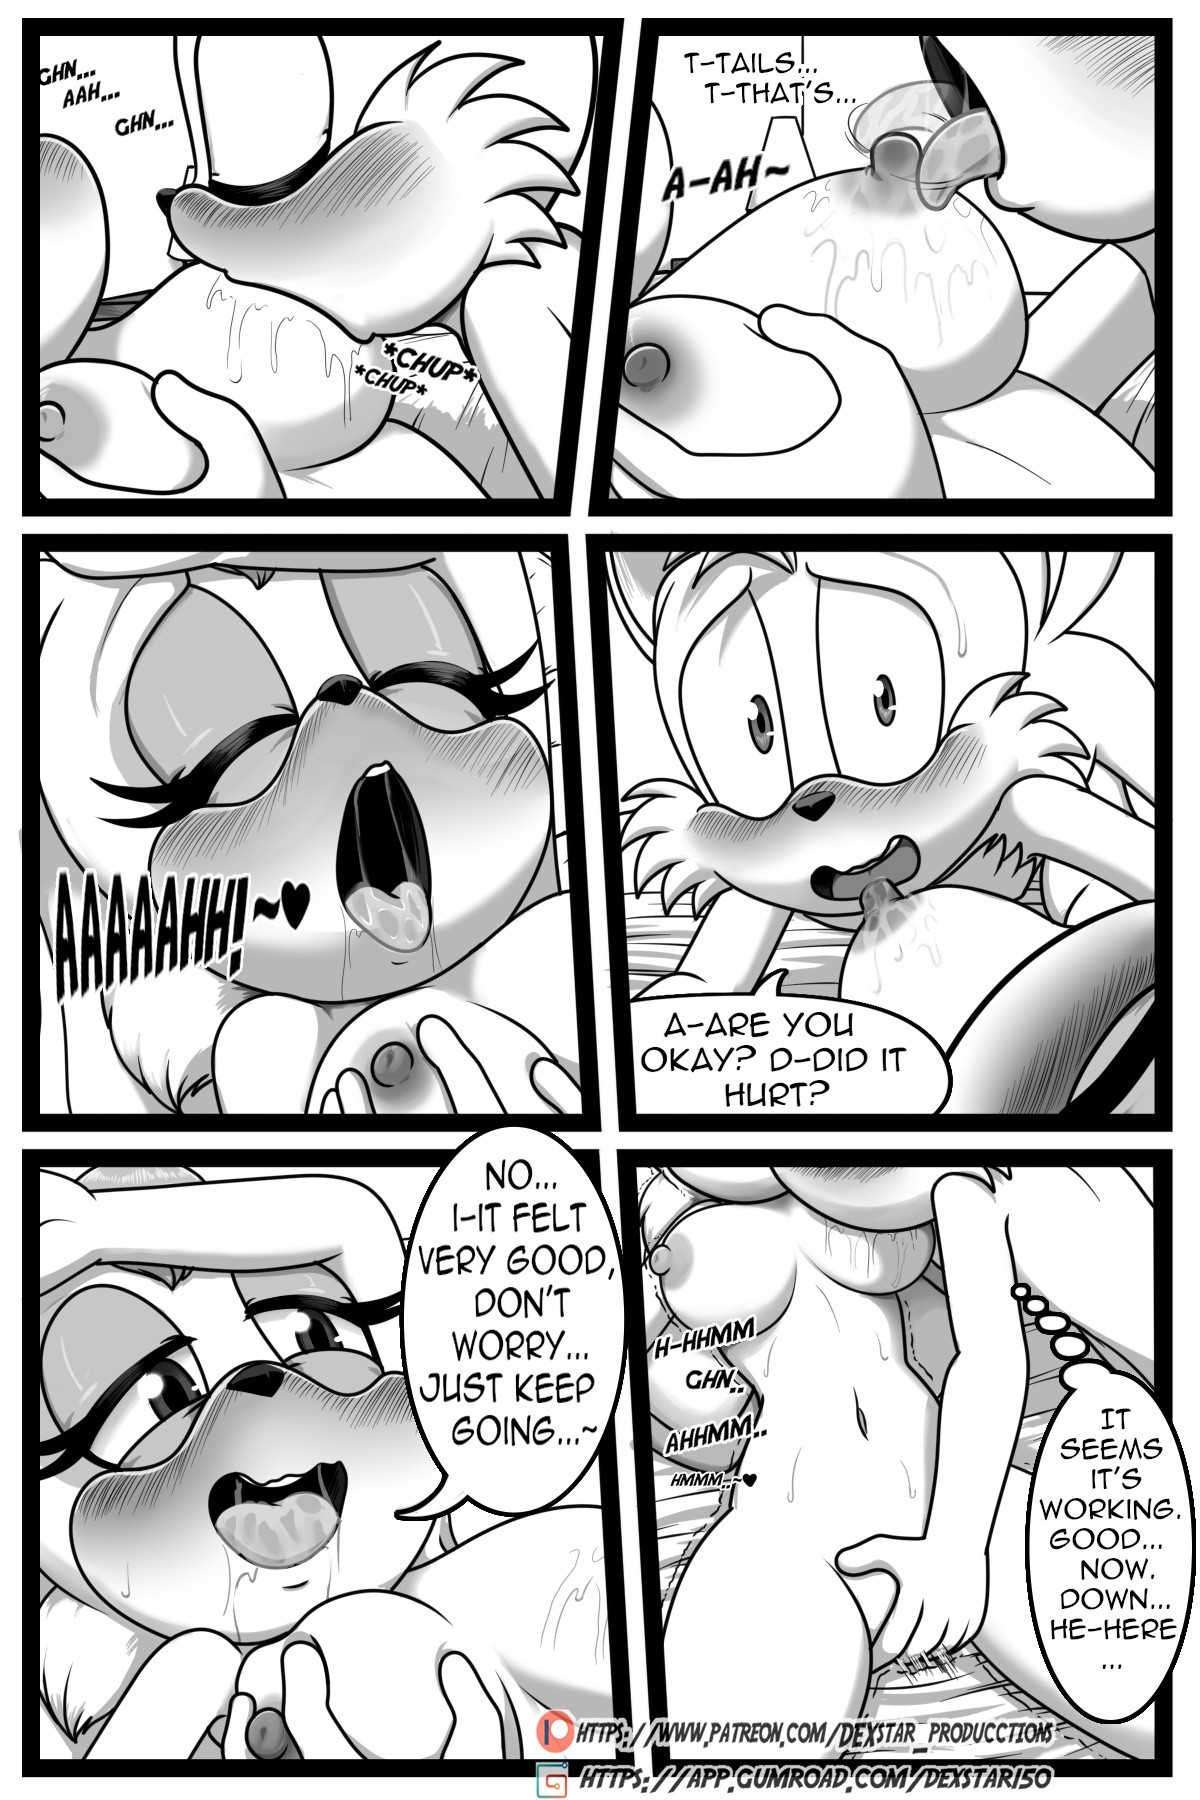 PLEASE FUCK ME - Cream x Tail (Extra Story!) porn comic picture 11